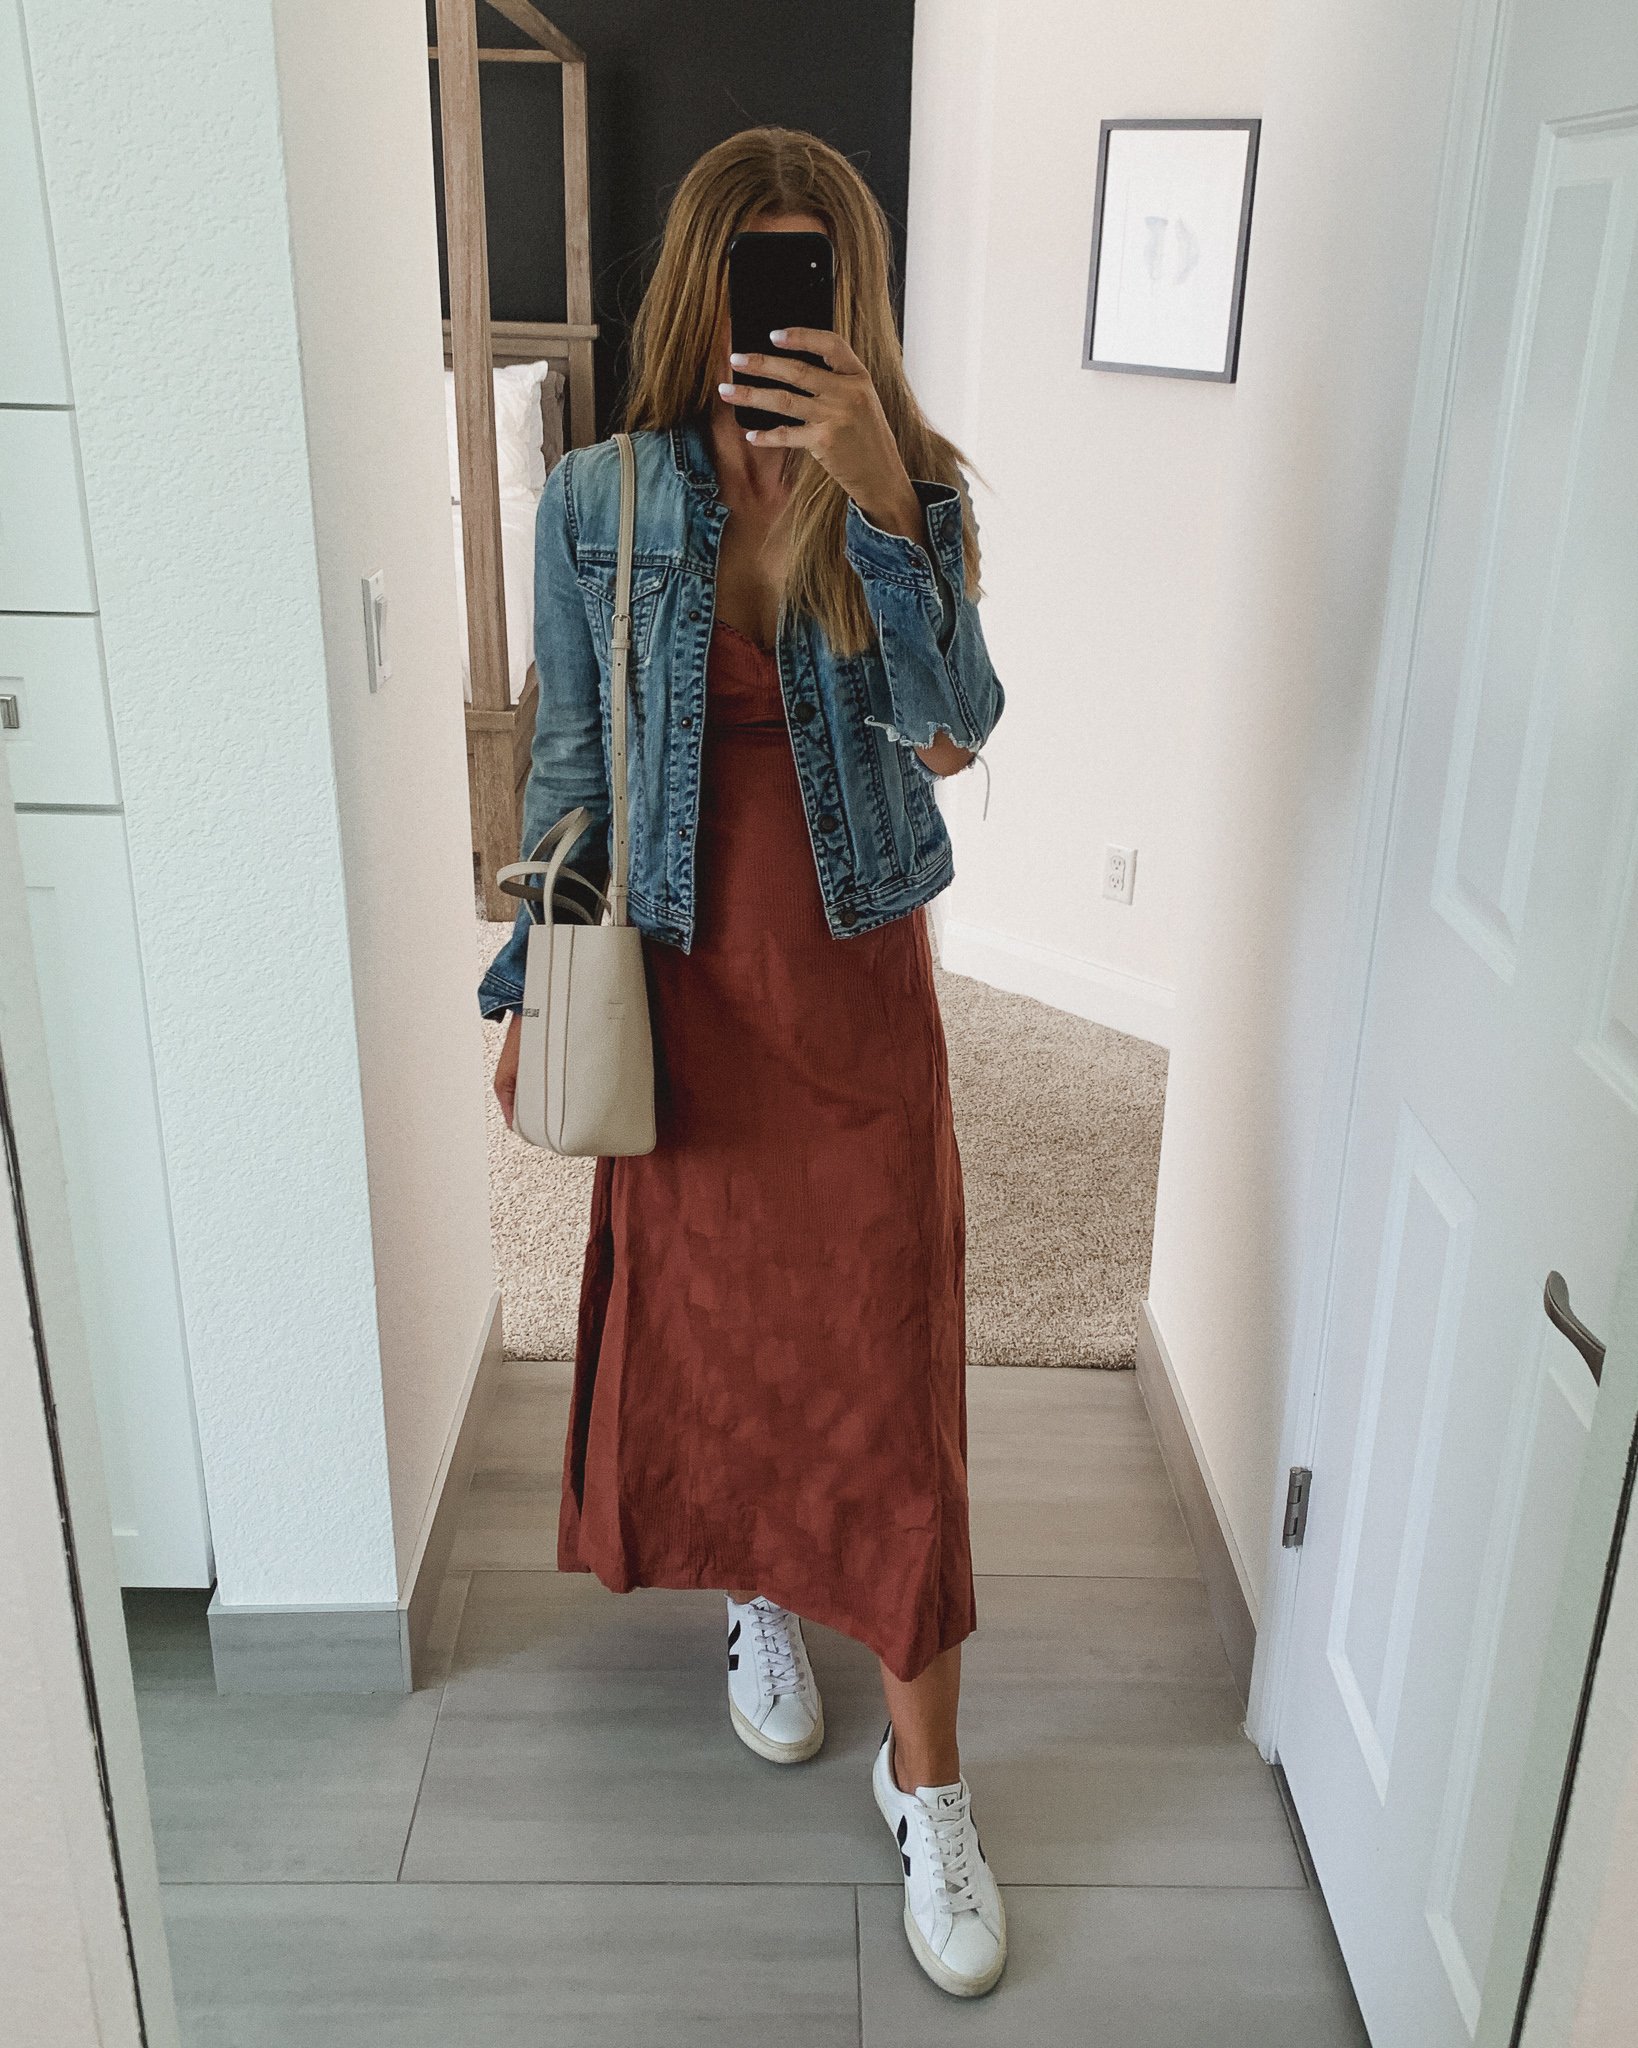  Jessica wearing Veja Esplar sneakers with Denim jacket outfit, Free People Dress and Balenciaga Everyday bag, ootd, causal style outfit 